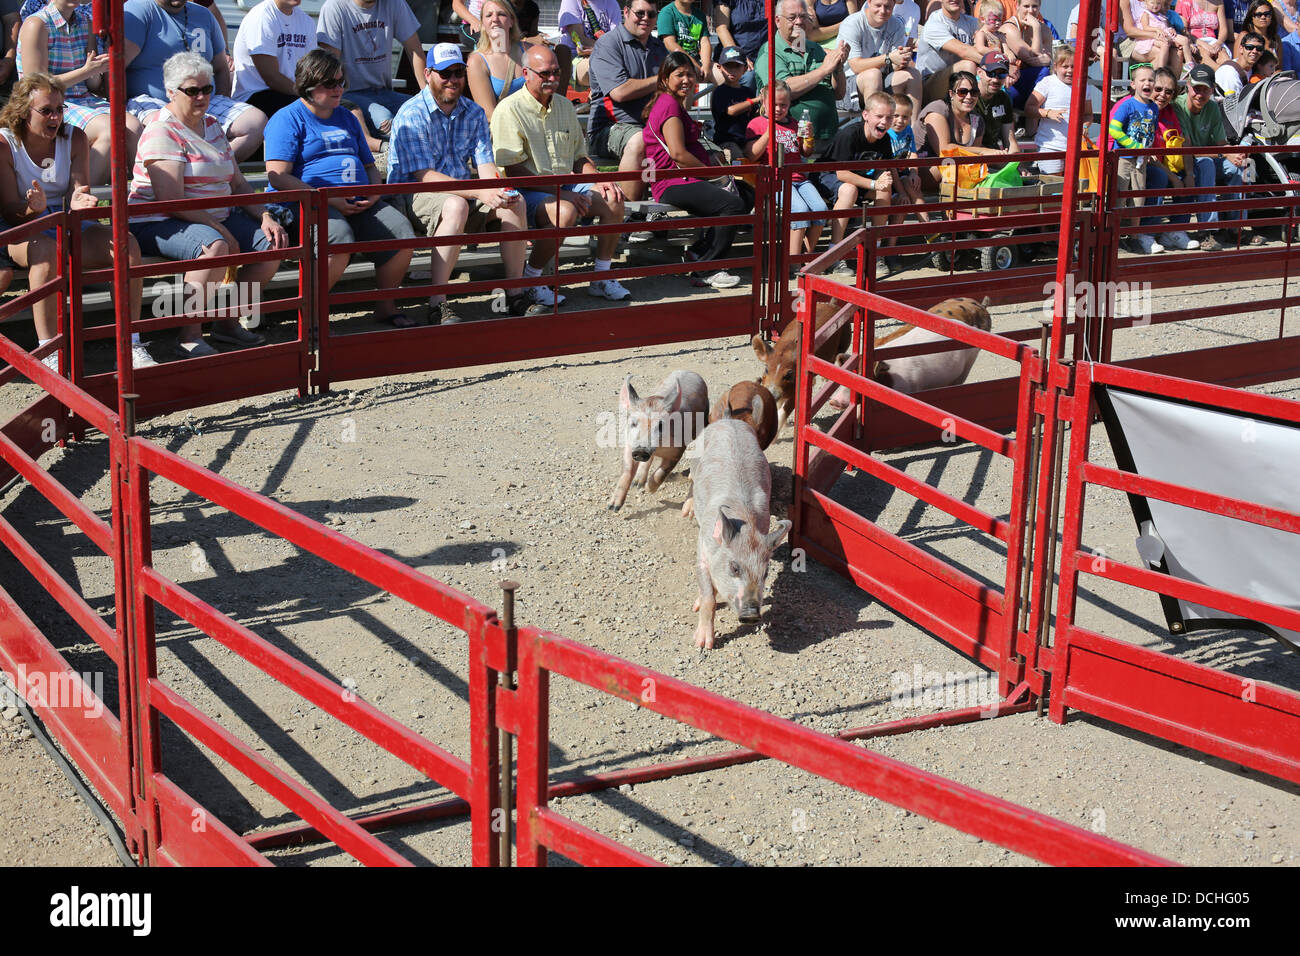 Spectators watching pig races at the Steele County Fair in Minnesota. Stock Photo